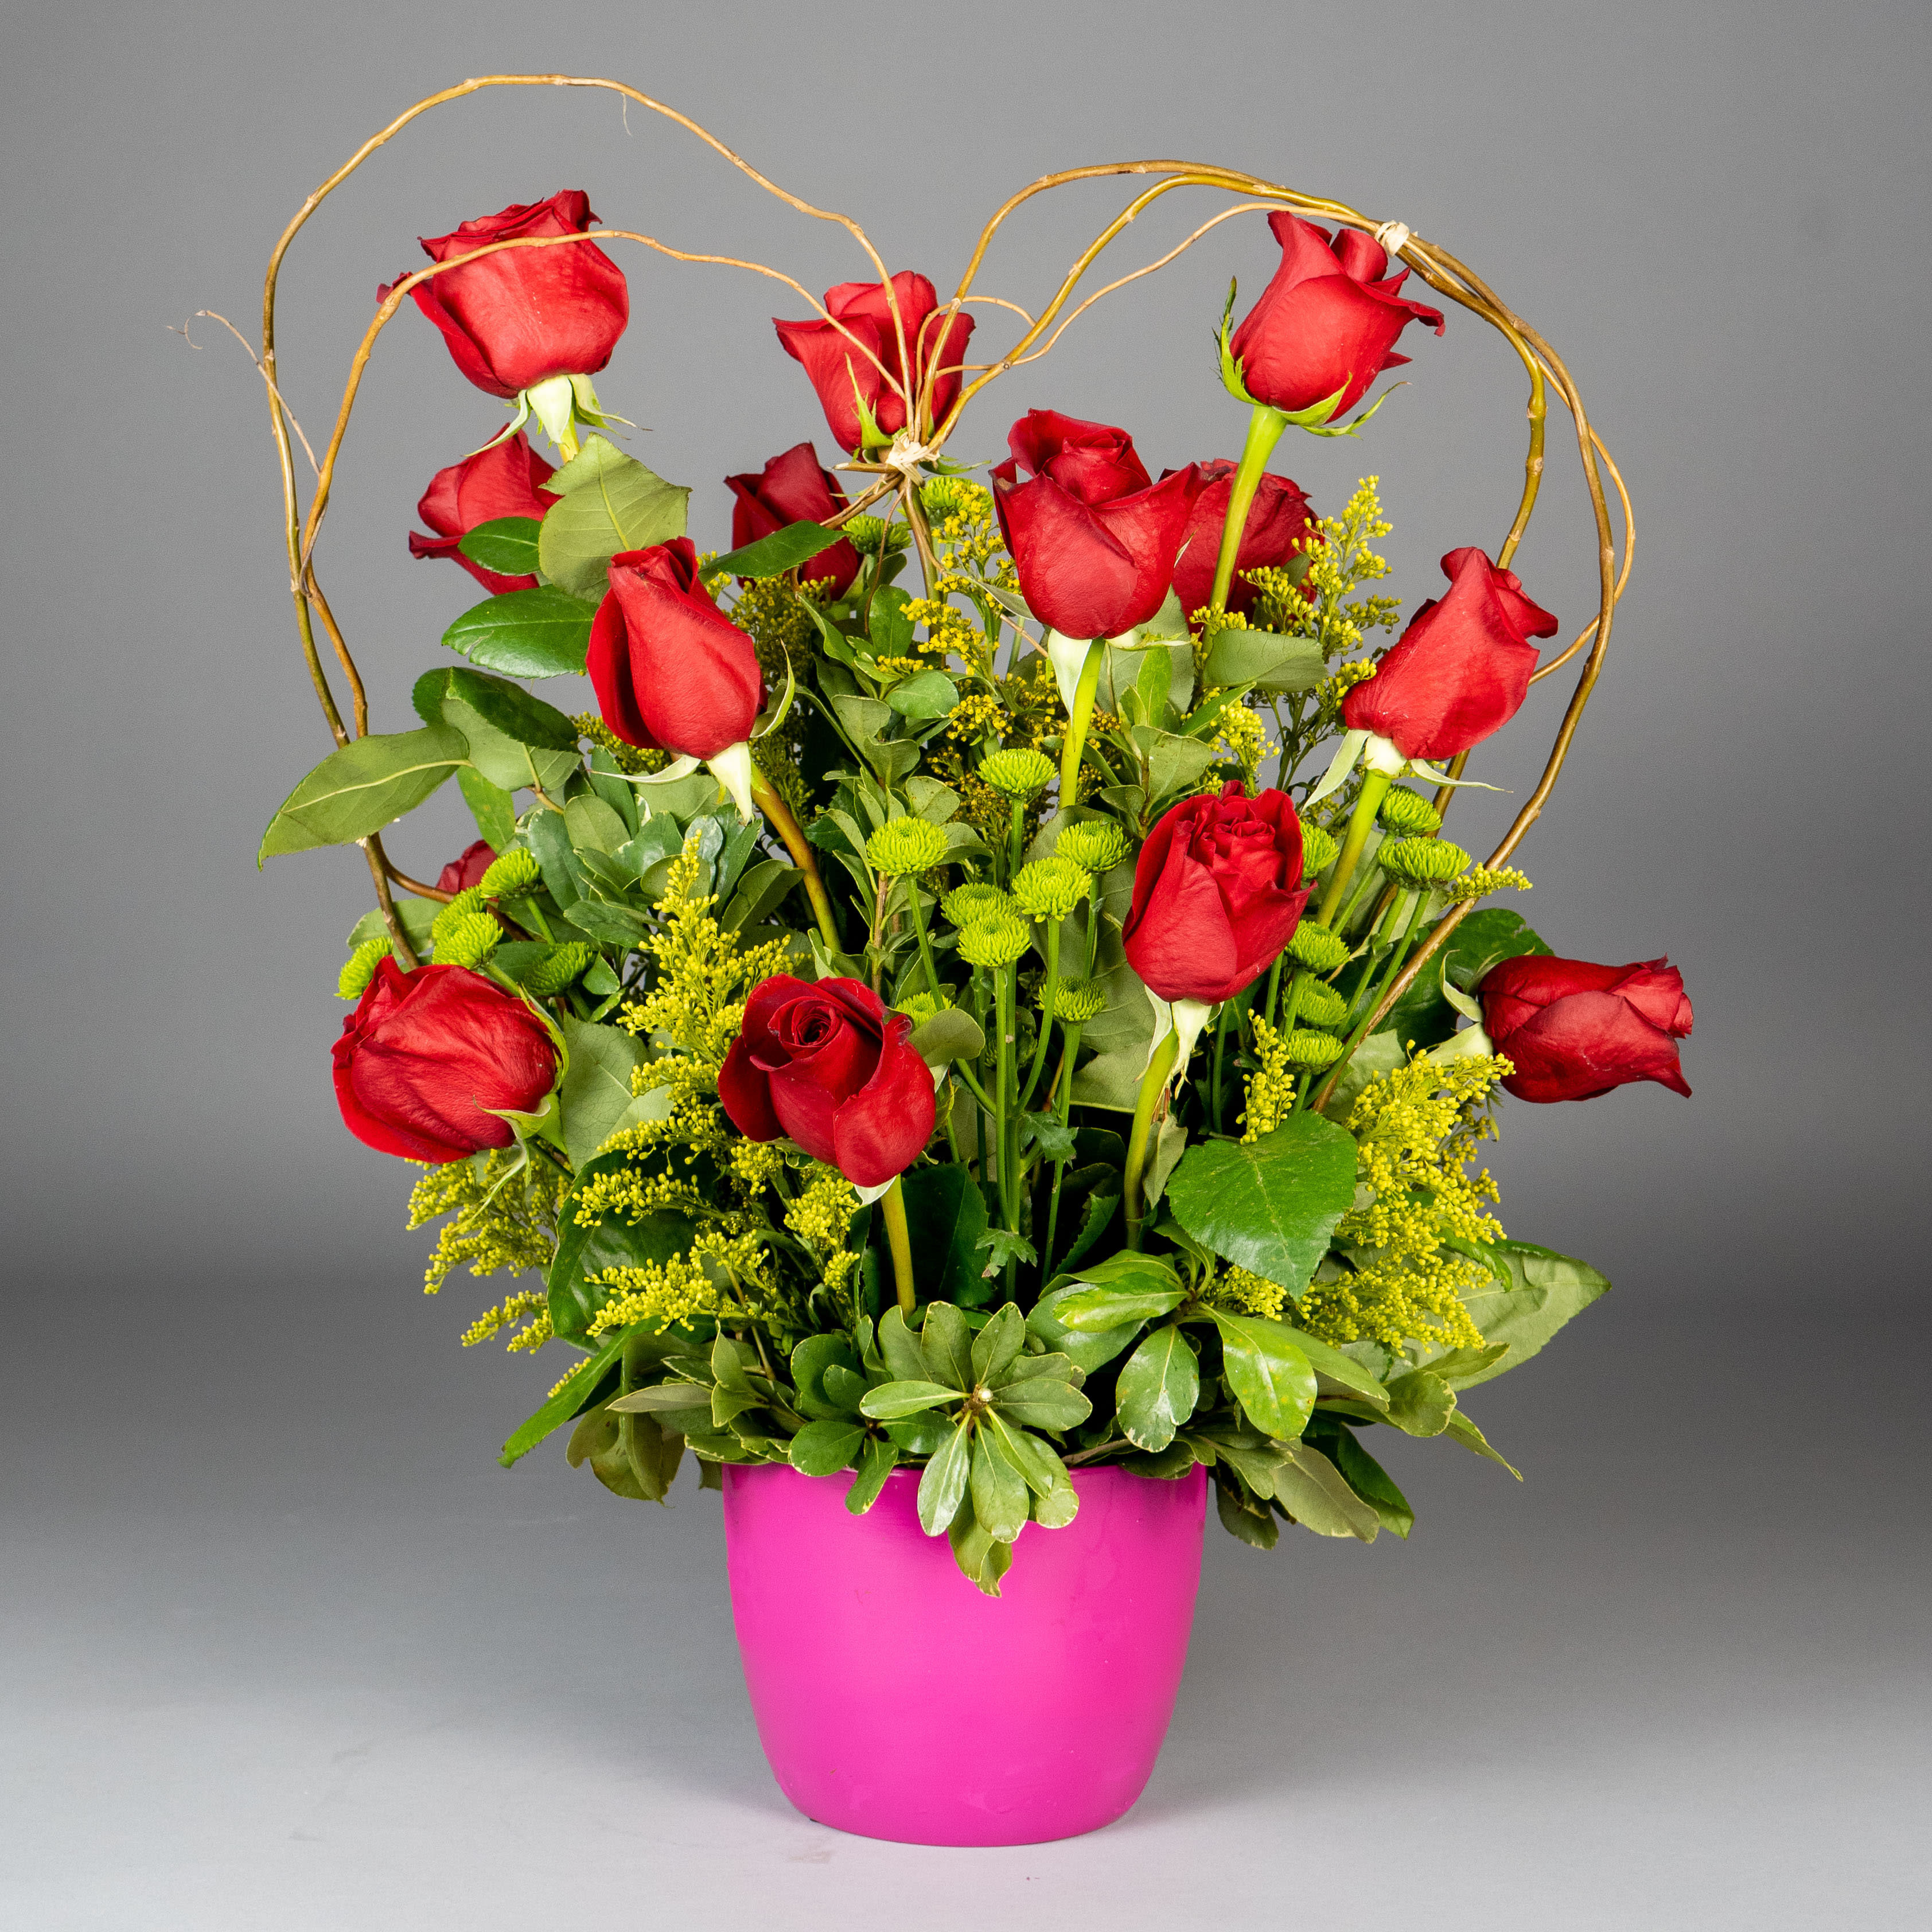 Passion Heart - Express your love with this stunning arrangement of long-stemmed roses artistically arranged in the shape of a heart and accented with curly willow. Standing tall in a modern container, this breathtaking design is sure to impress your special someone.